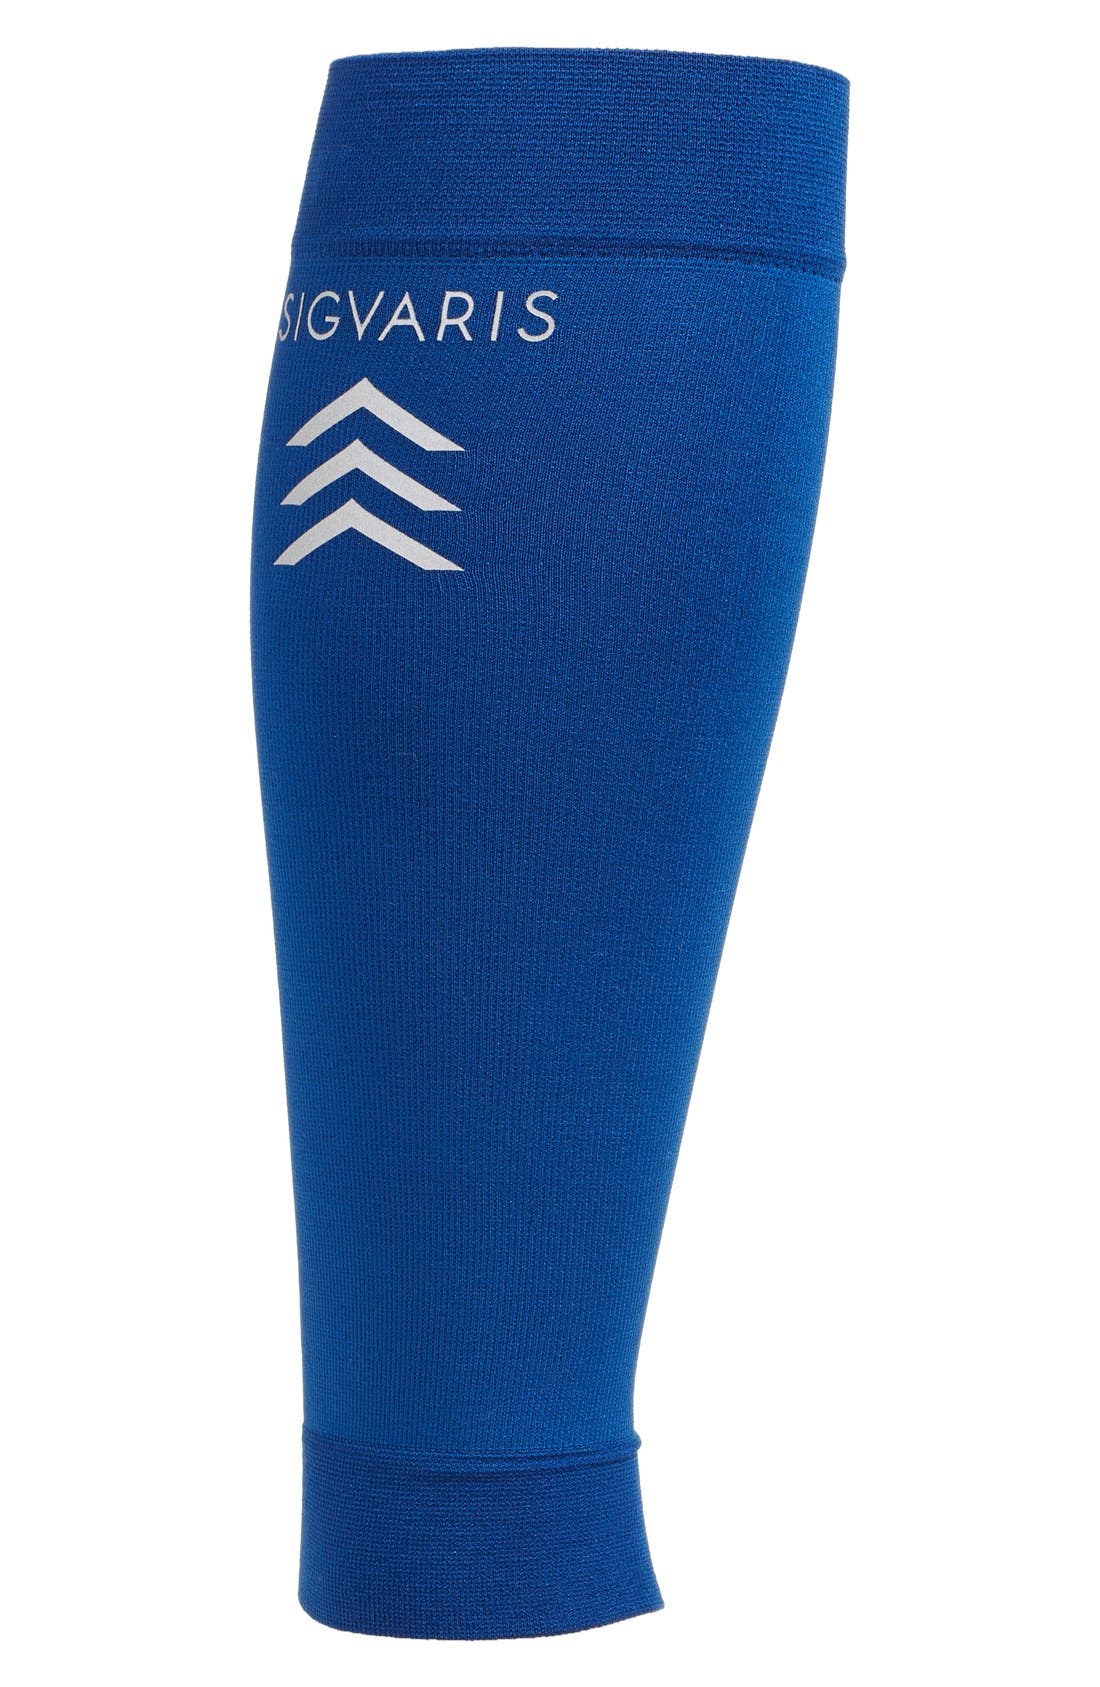 UPC 745129216931 product image for Men's Insignia By Sigvaris 'Sports' Graduated Compression Performance Calf Sleev | upcitemdb.com